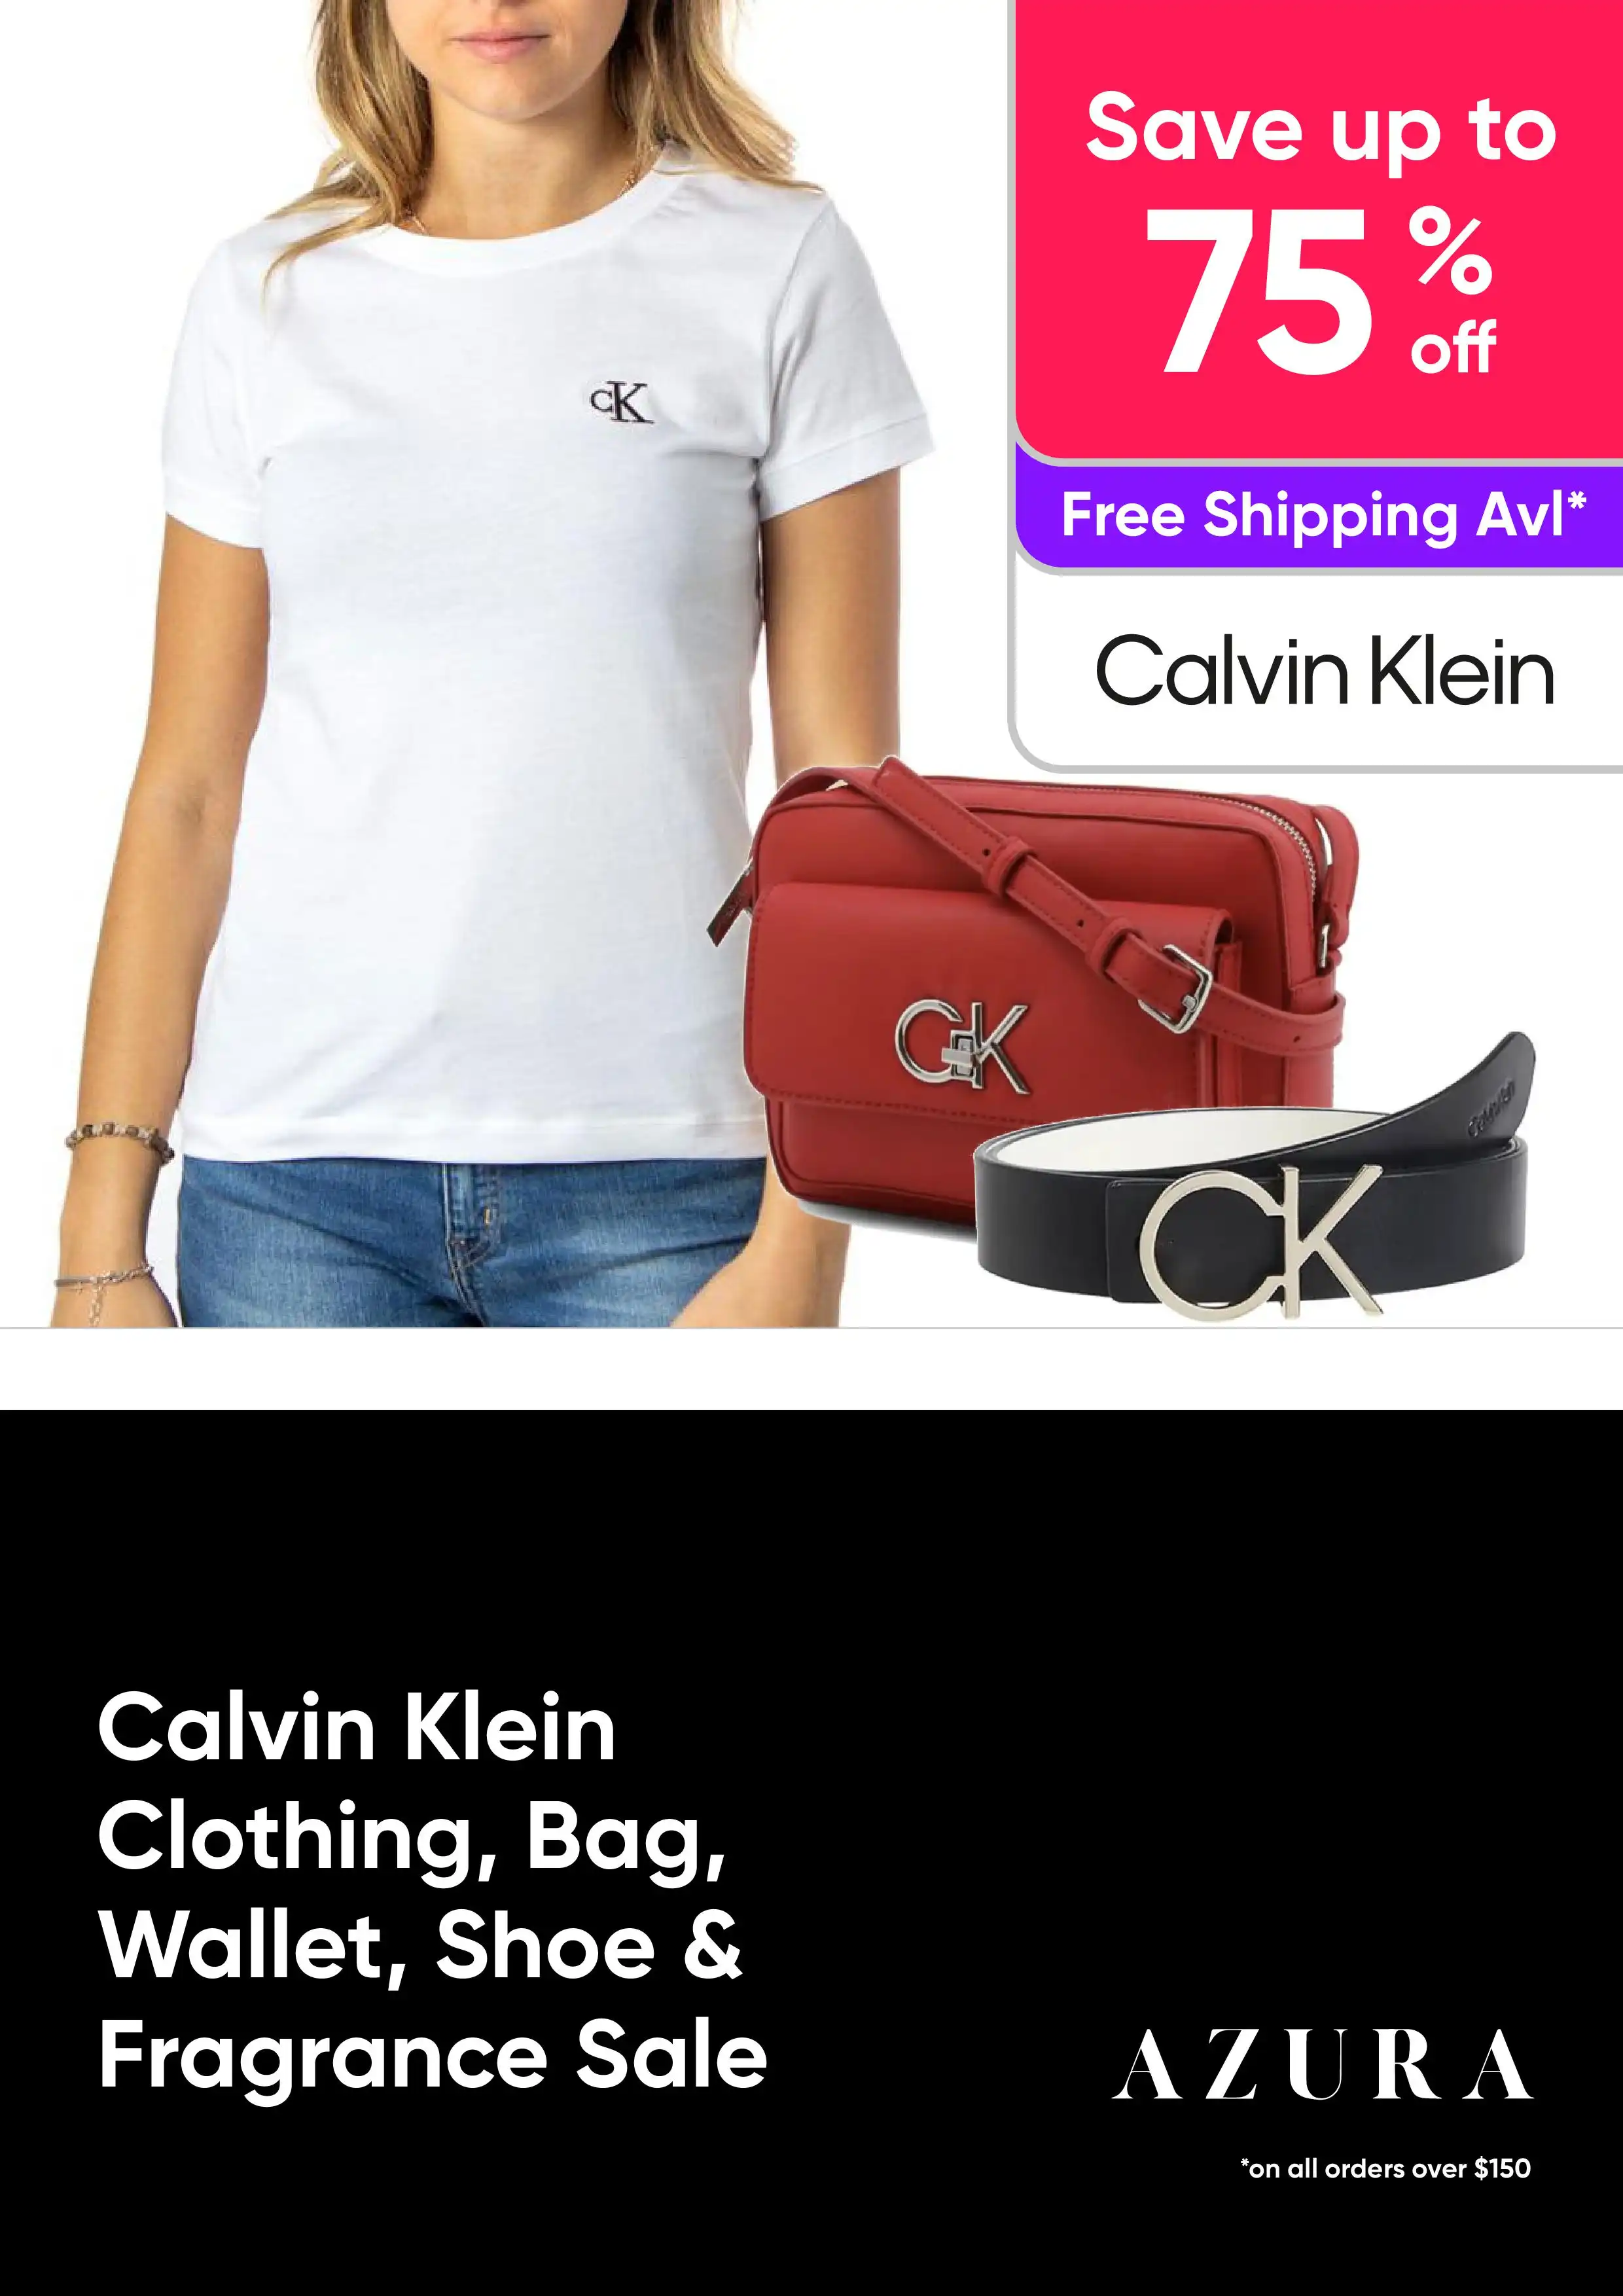 Calvin Klein Bag and Clothing Sale - up to 75% off | Lasoo